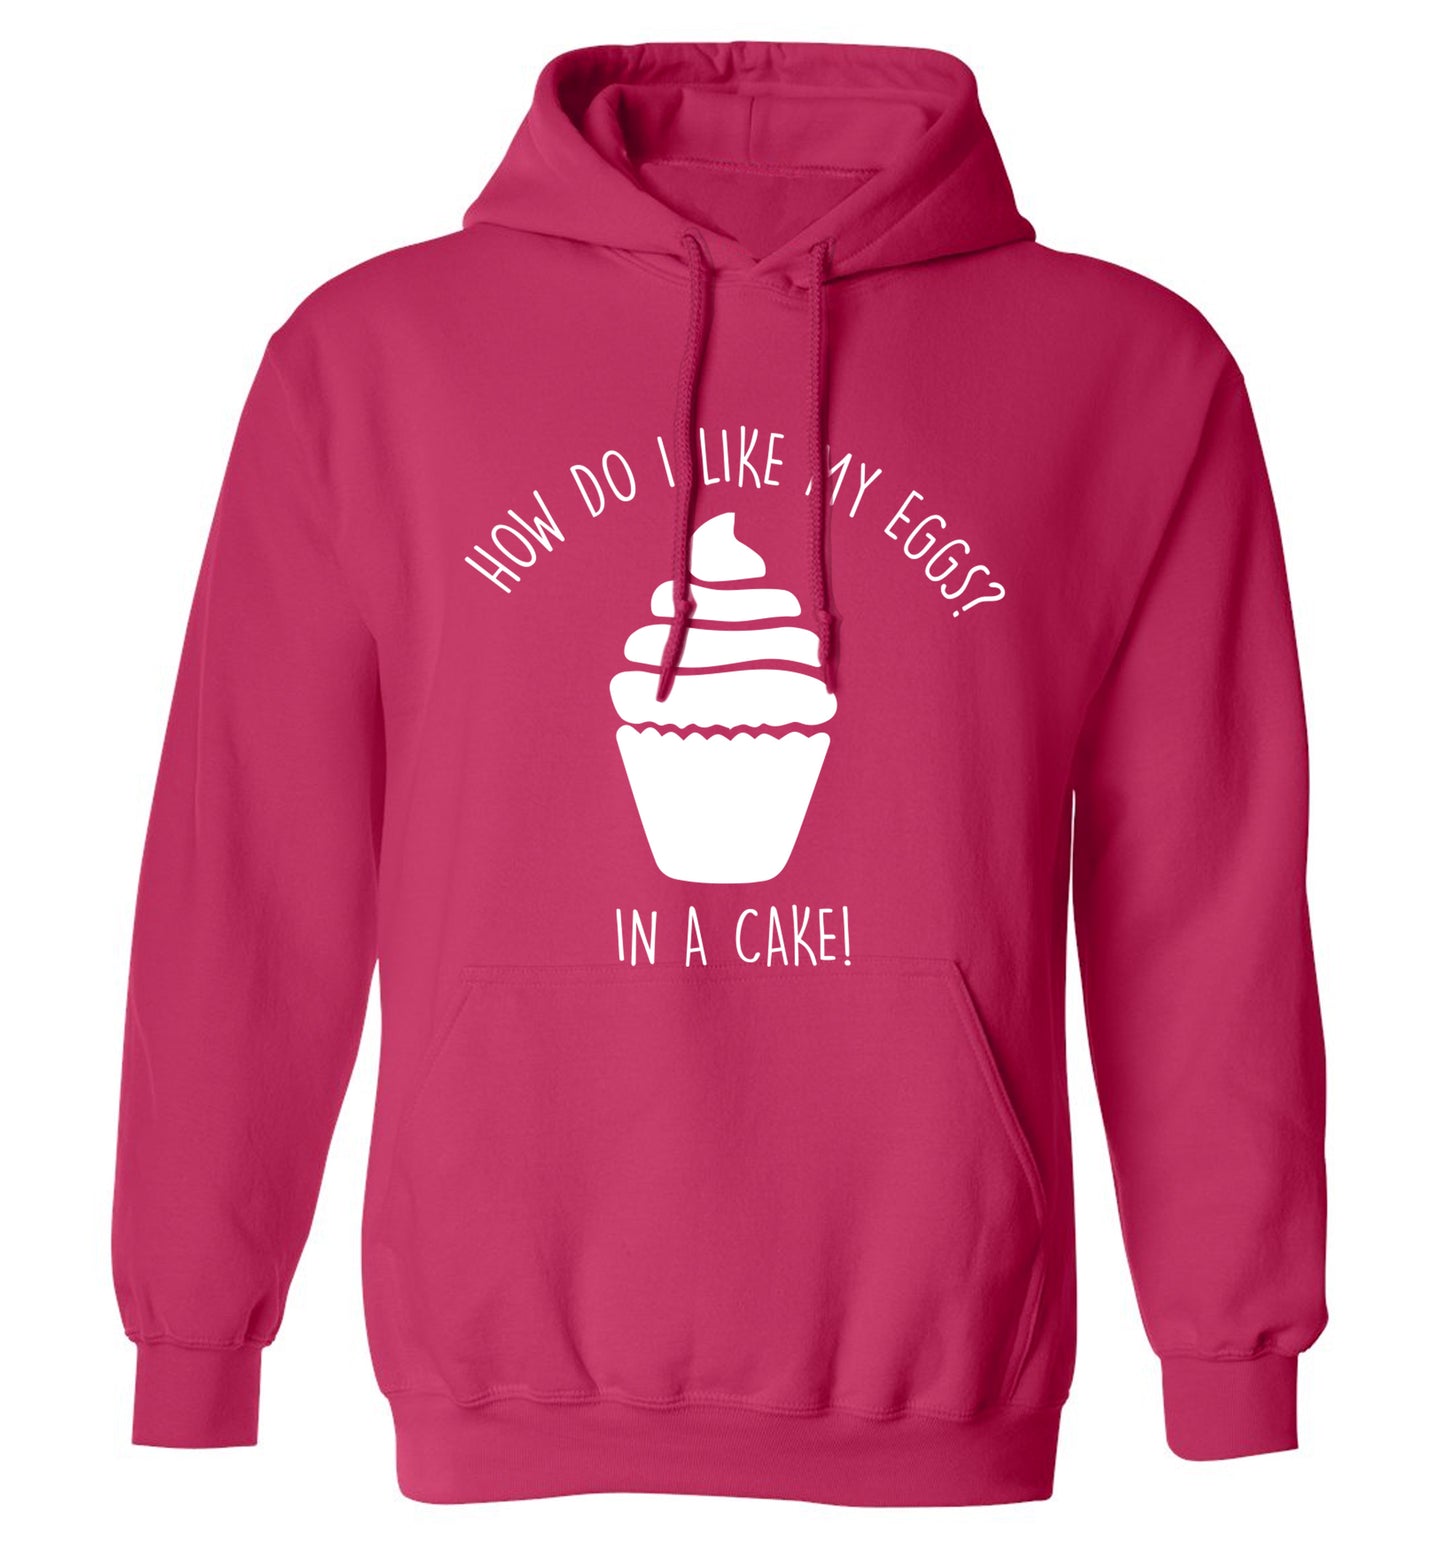 How do I like my eggs? In a cake! adults unisex pink hoodie 2XL